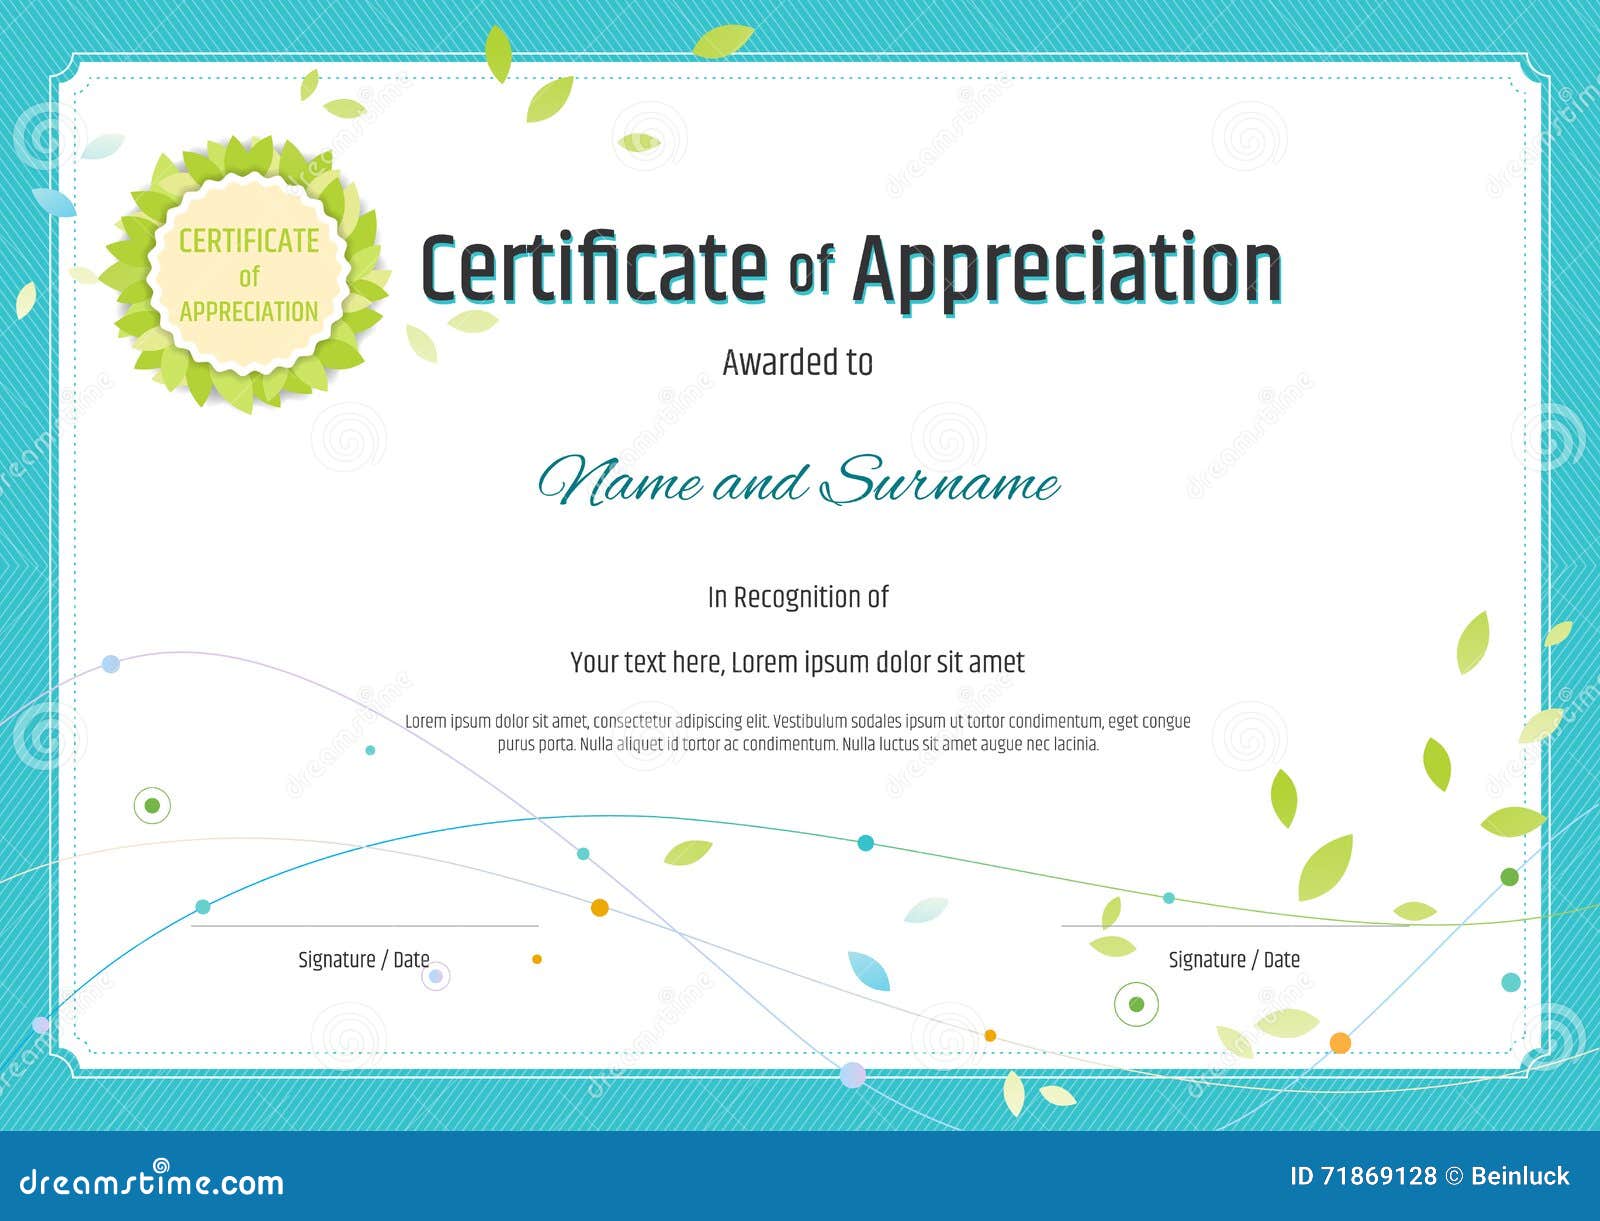 Certificate Of Appreciation Template In Nature Theme With Green Stock Vector Illustration Of Elements Guarantee 71869128